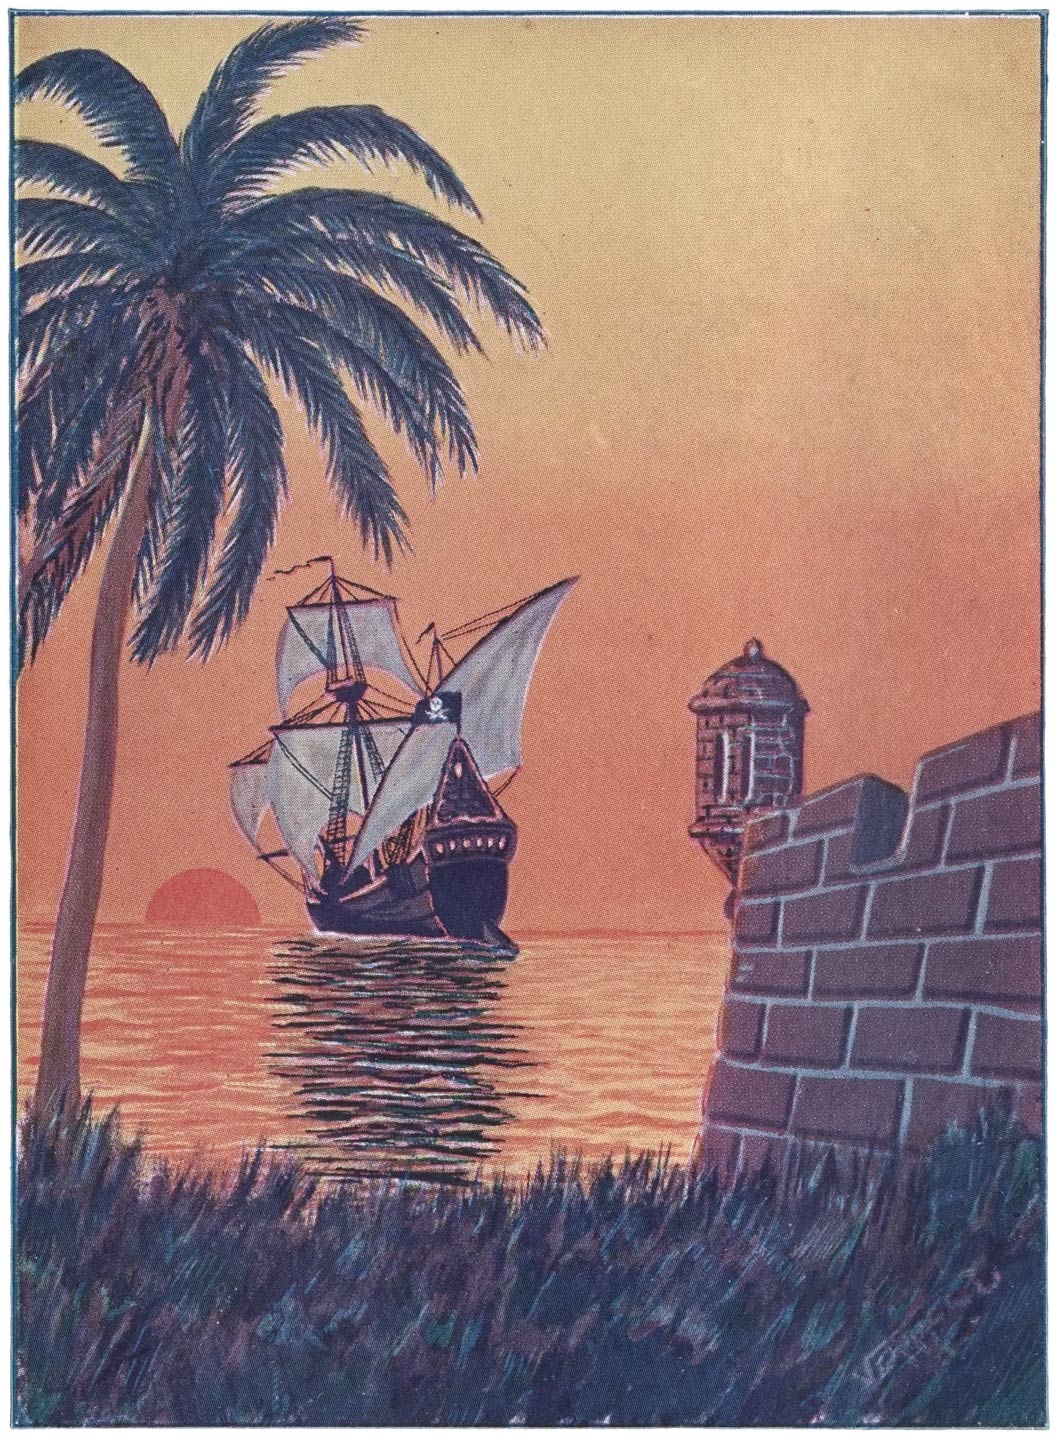 At dawn the buccaneers sailed away